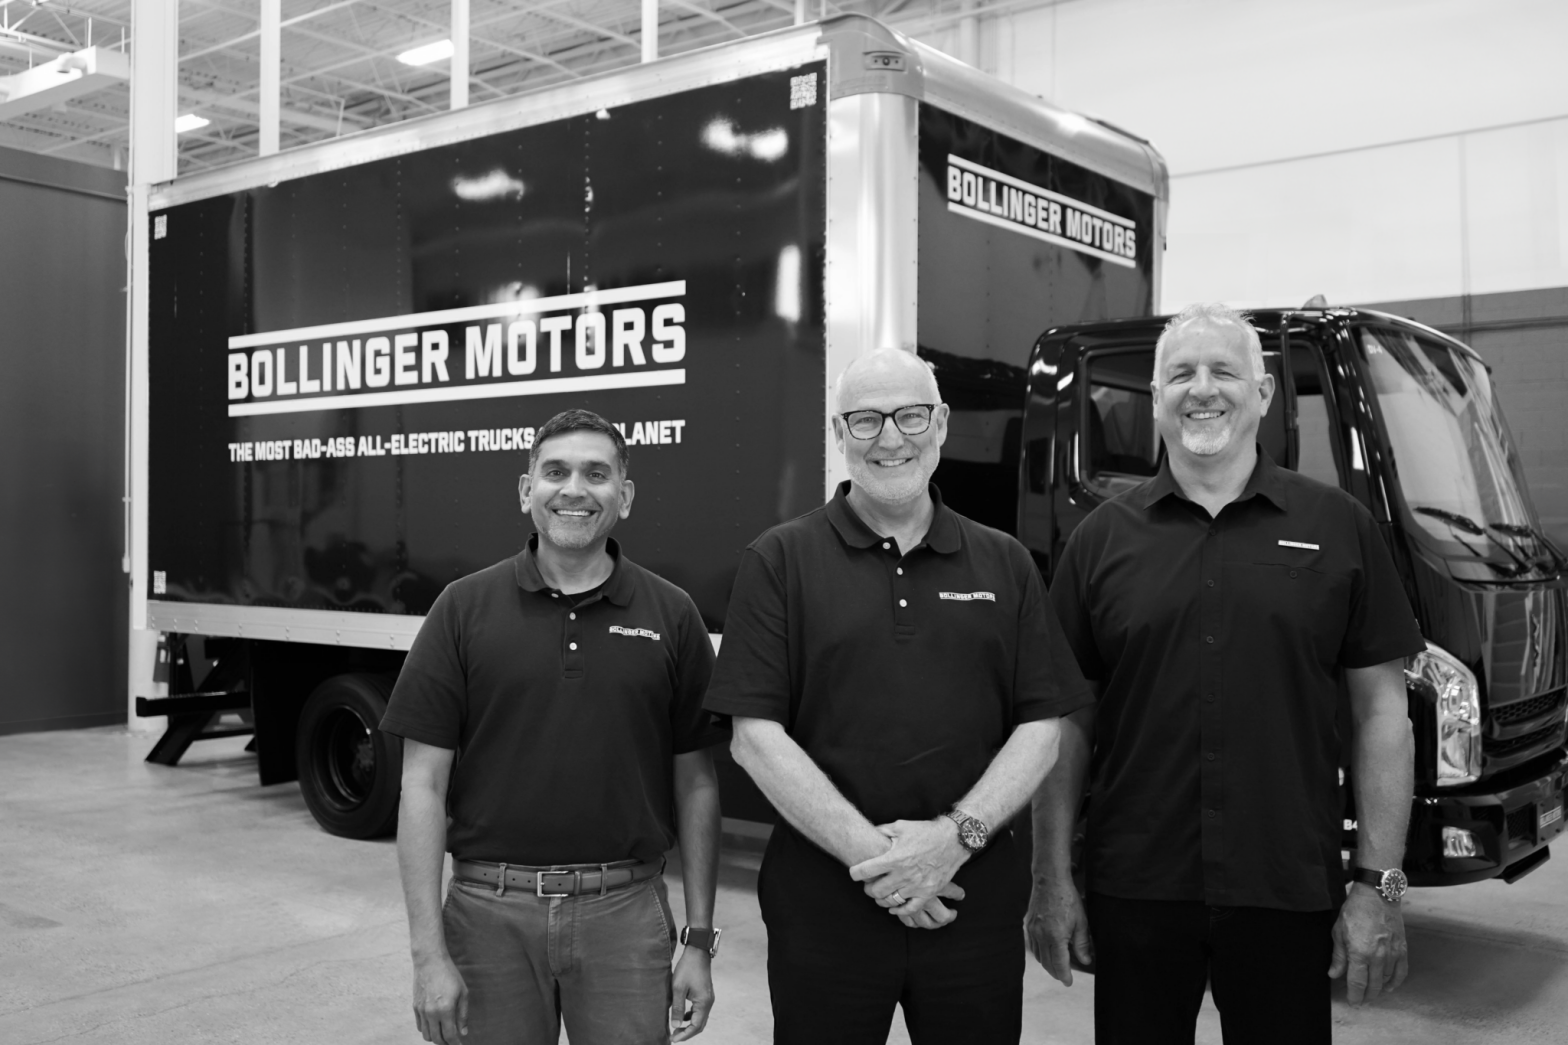 In a black and white picture, from left to right: Siva Kumar, James Taylor, Bryan Chambers in front of a truck